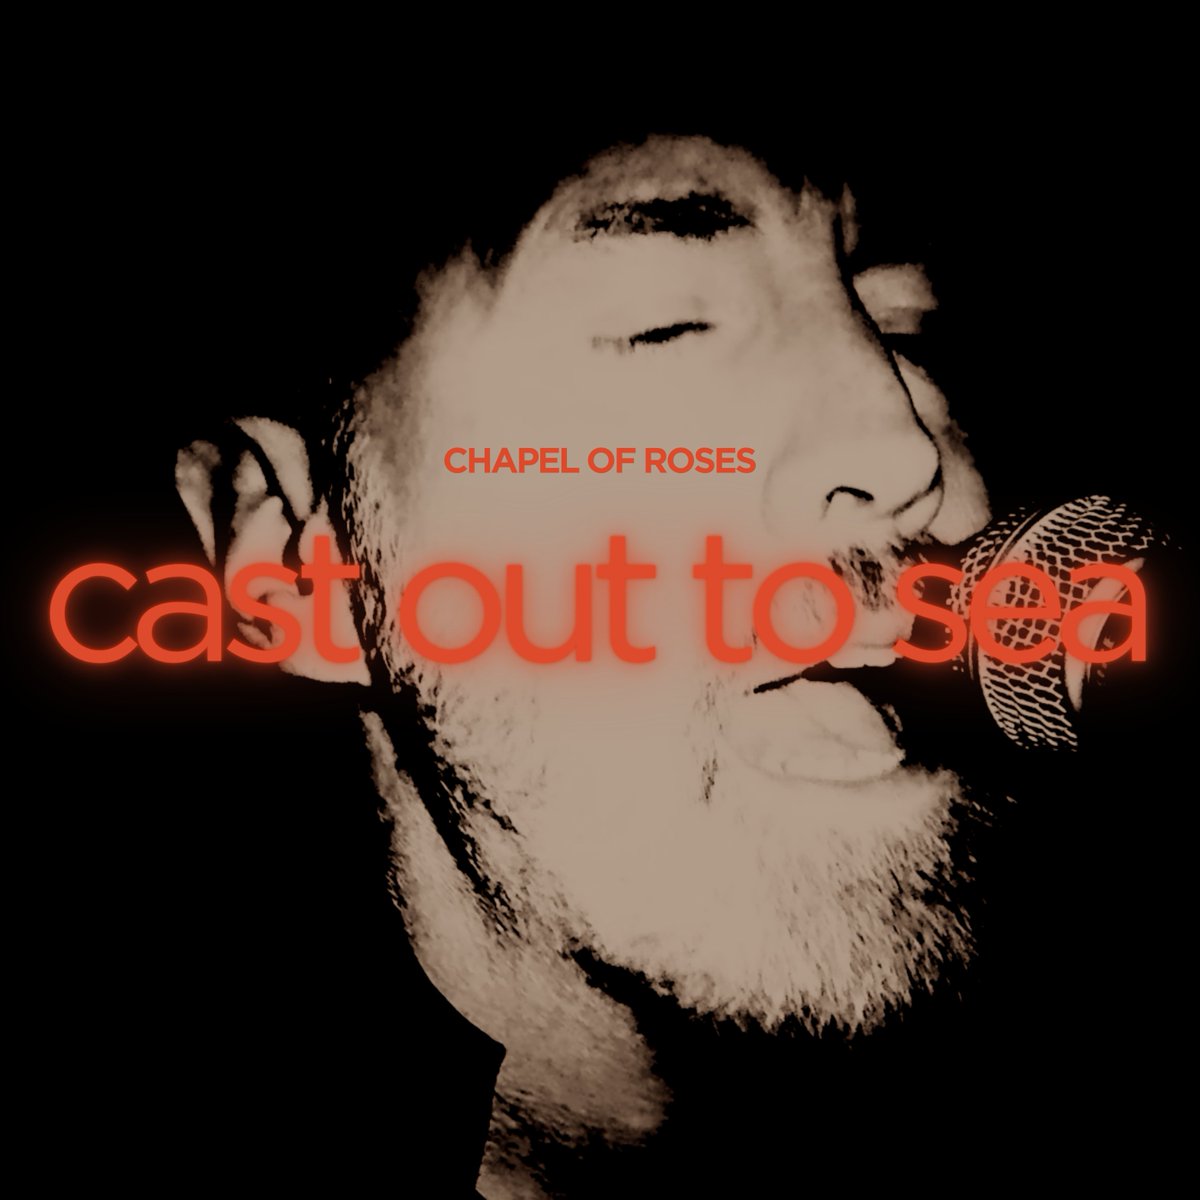 Listen to the single 'Cast out to Sea' and enjoy the awesome track from the impressive Chapel of Roses. #indiedockmusicblog #indierock eu1.hubs.ly/H09bBj80